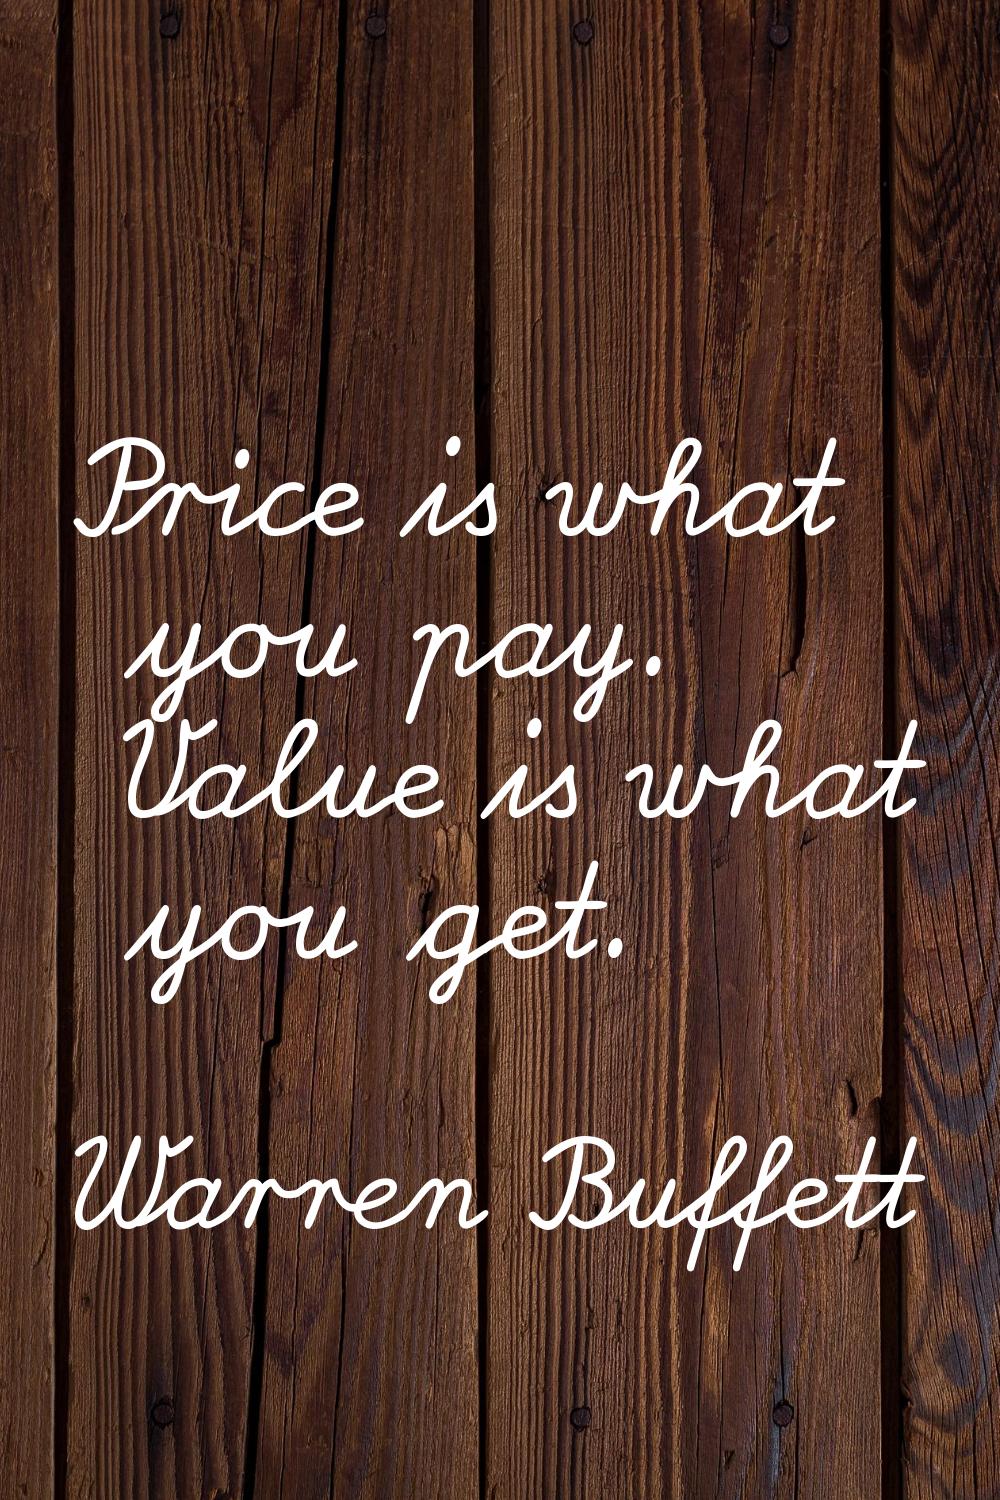 Price is what you pay. Value is what you get.